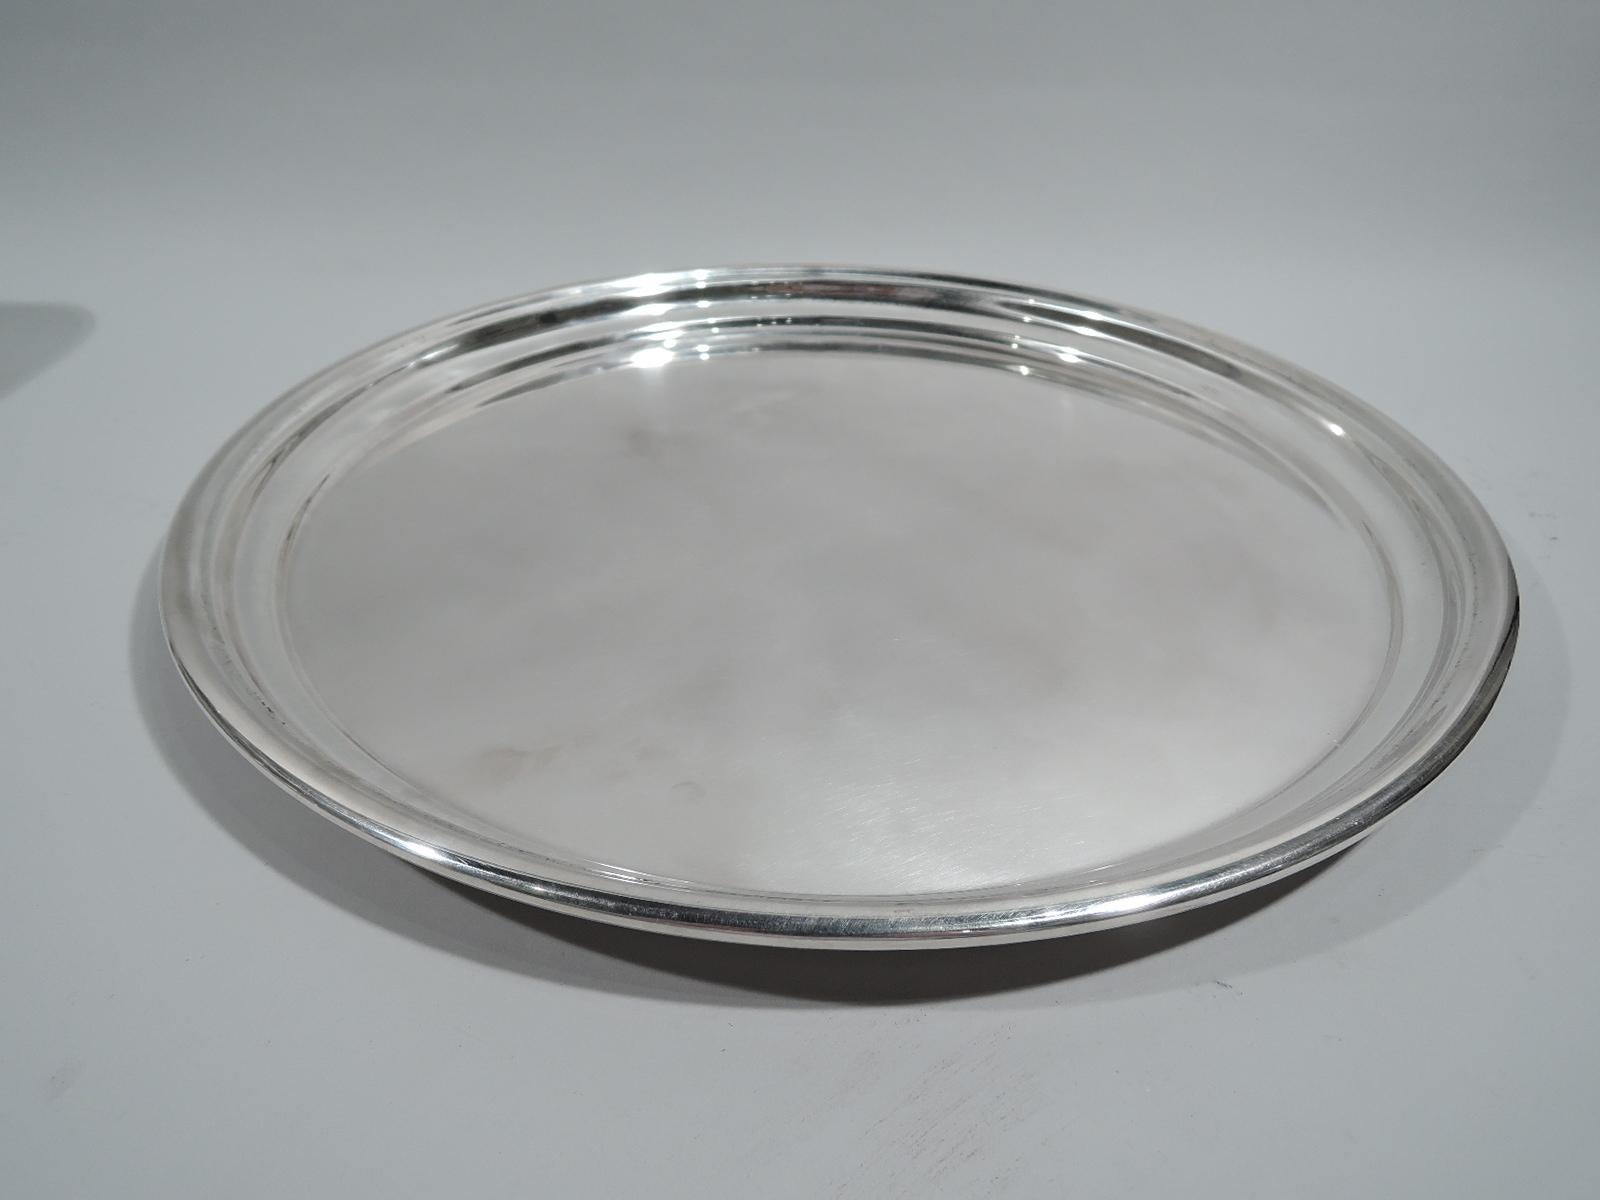 Large and Modern sterling silver tray, ca 1960. Retailed by Cartier in New York. Round with curved sides and molded rim. Perfectly portable with nice heft and balance. Fully marked including retailer’s stamp and no. 354P. Weight: 43.5 troy ounces.